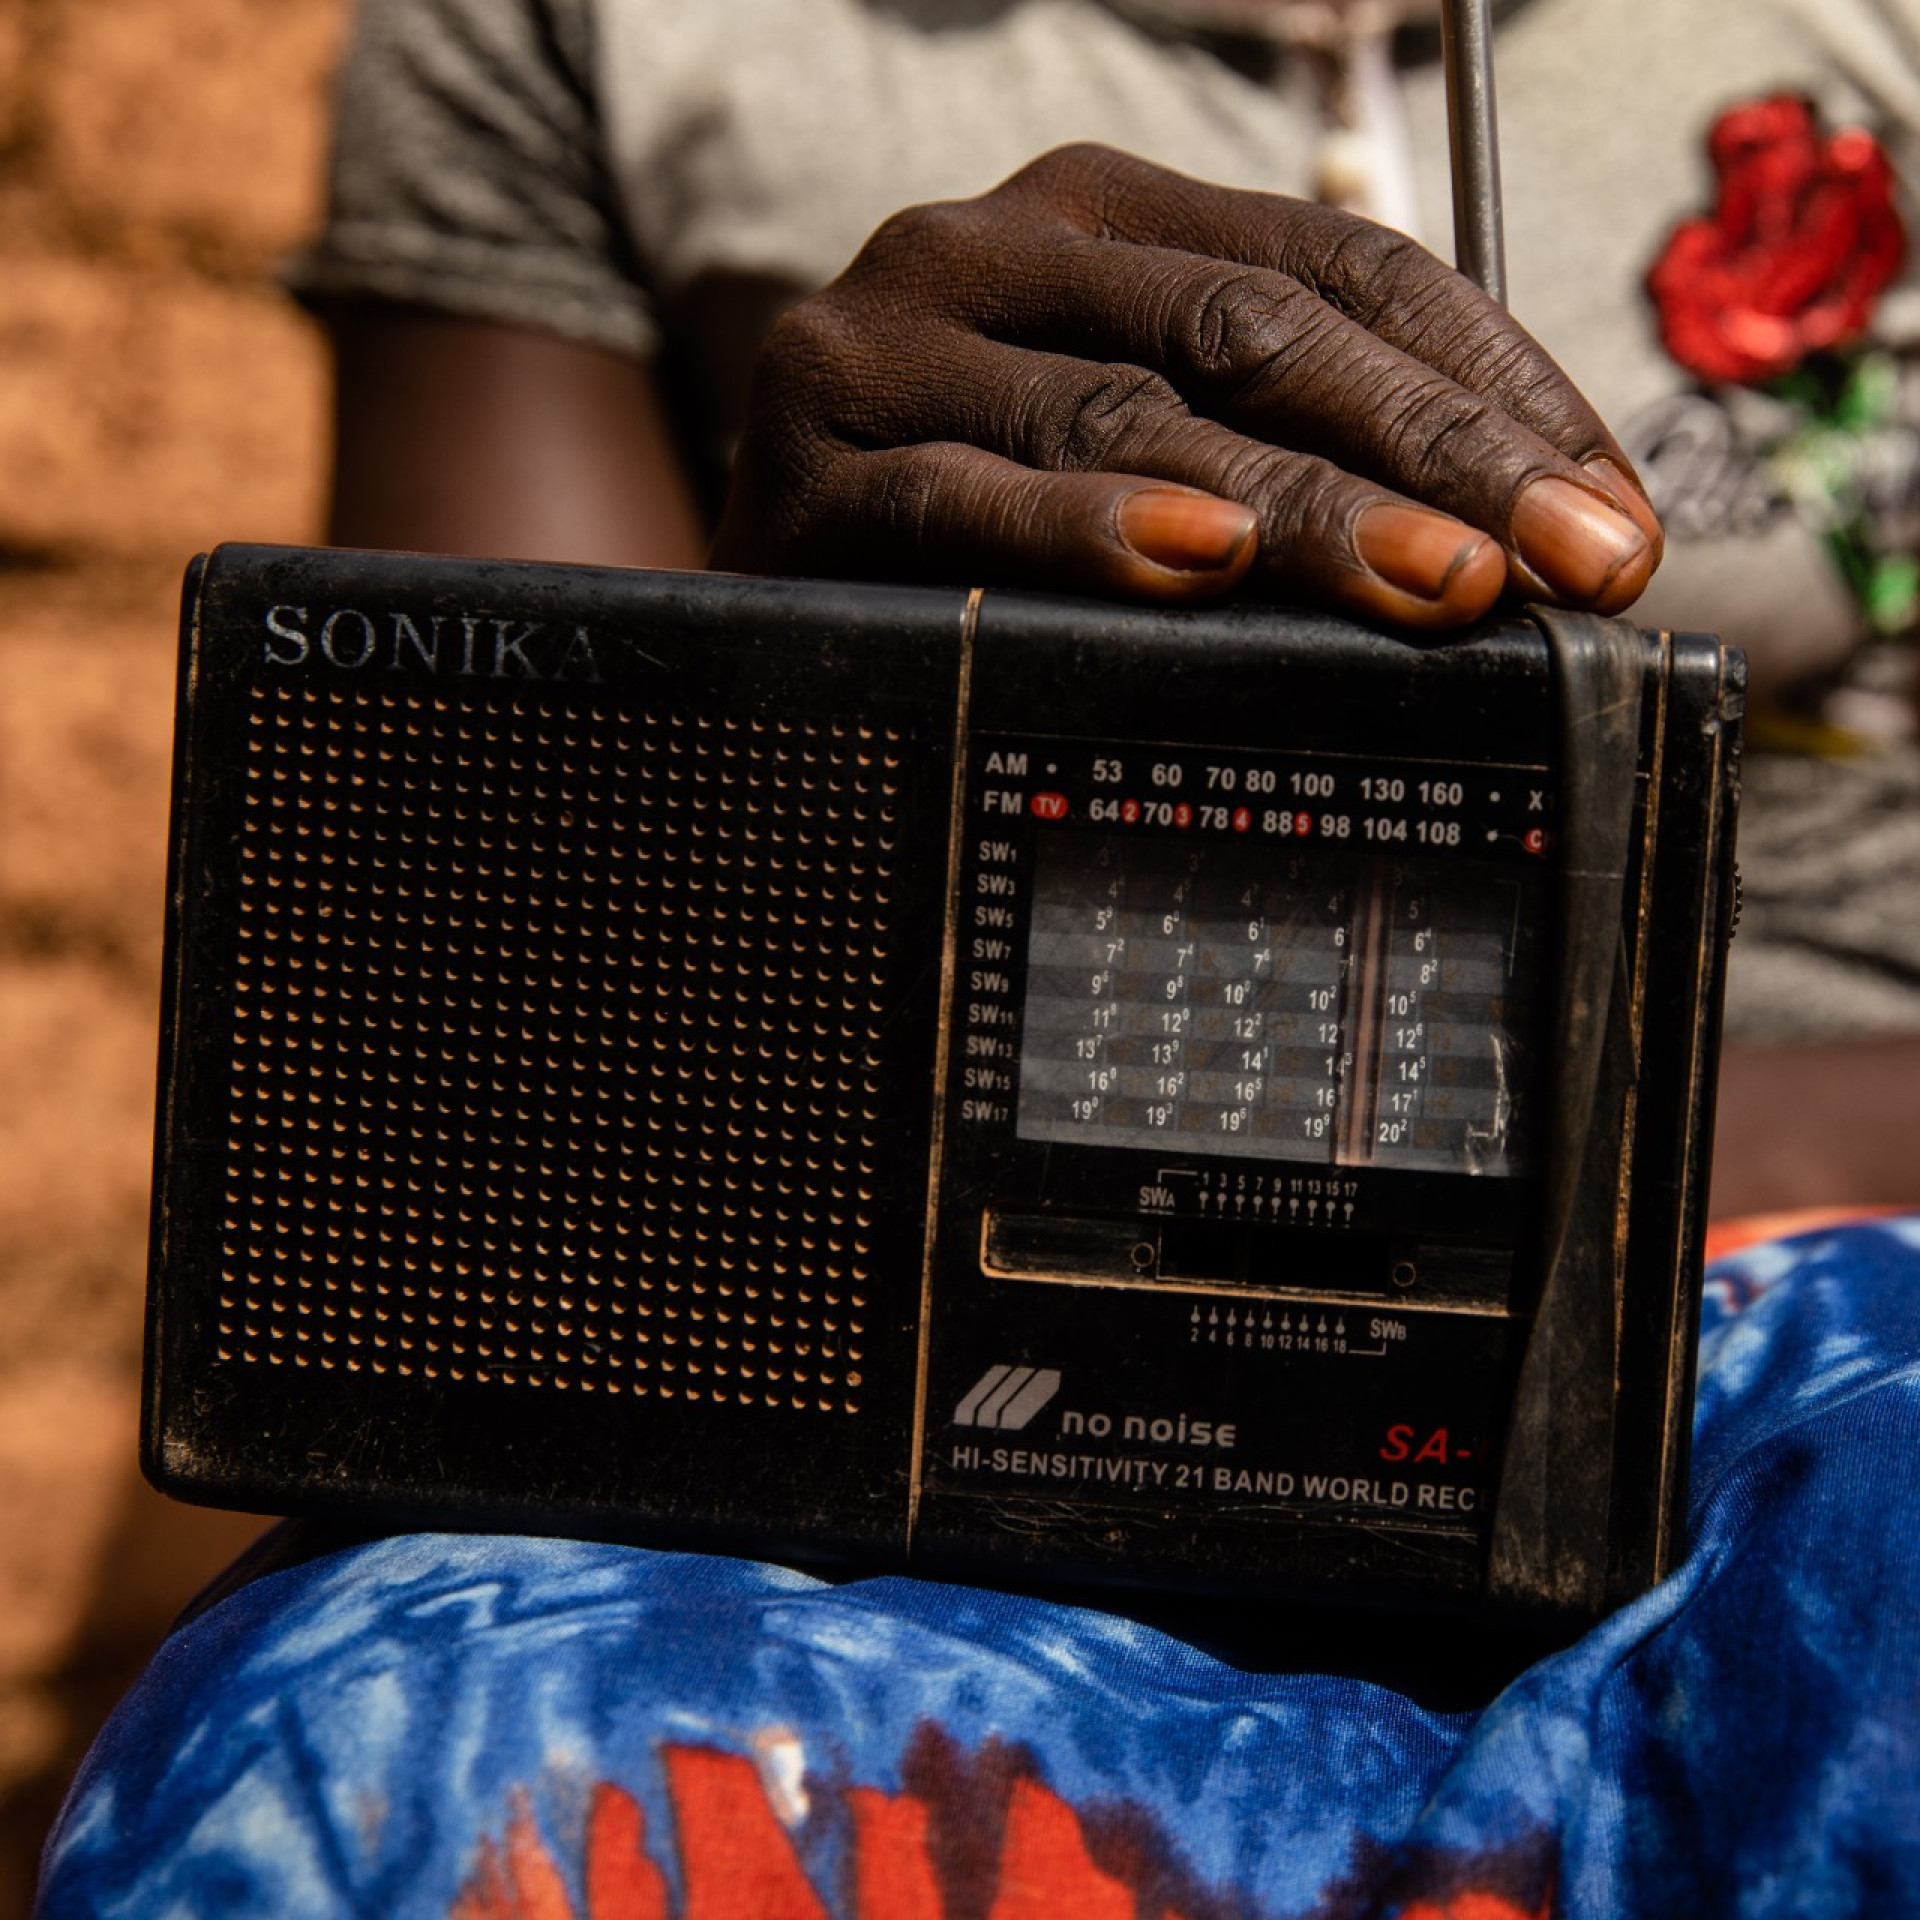 A radio on a woman's lap demonstrating the distribution mechanism used in this campaign